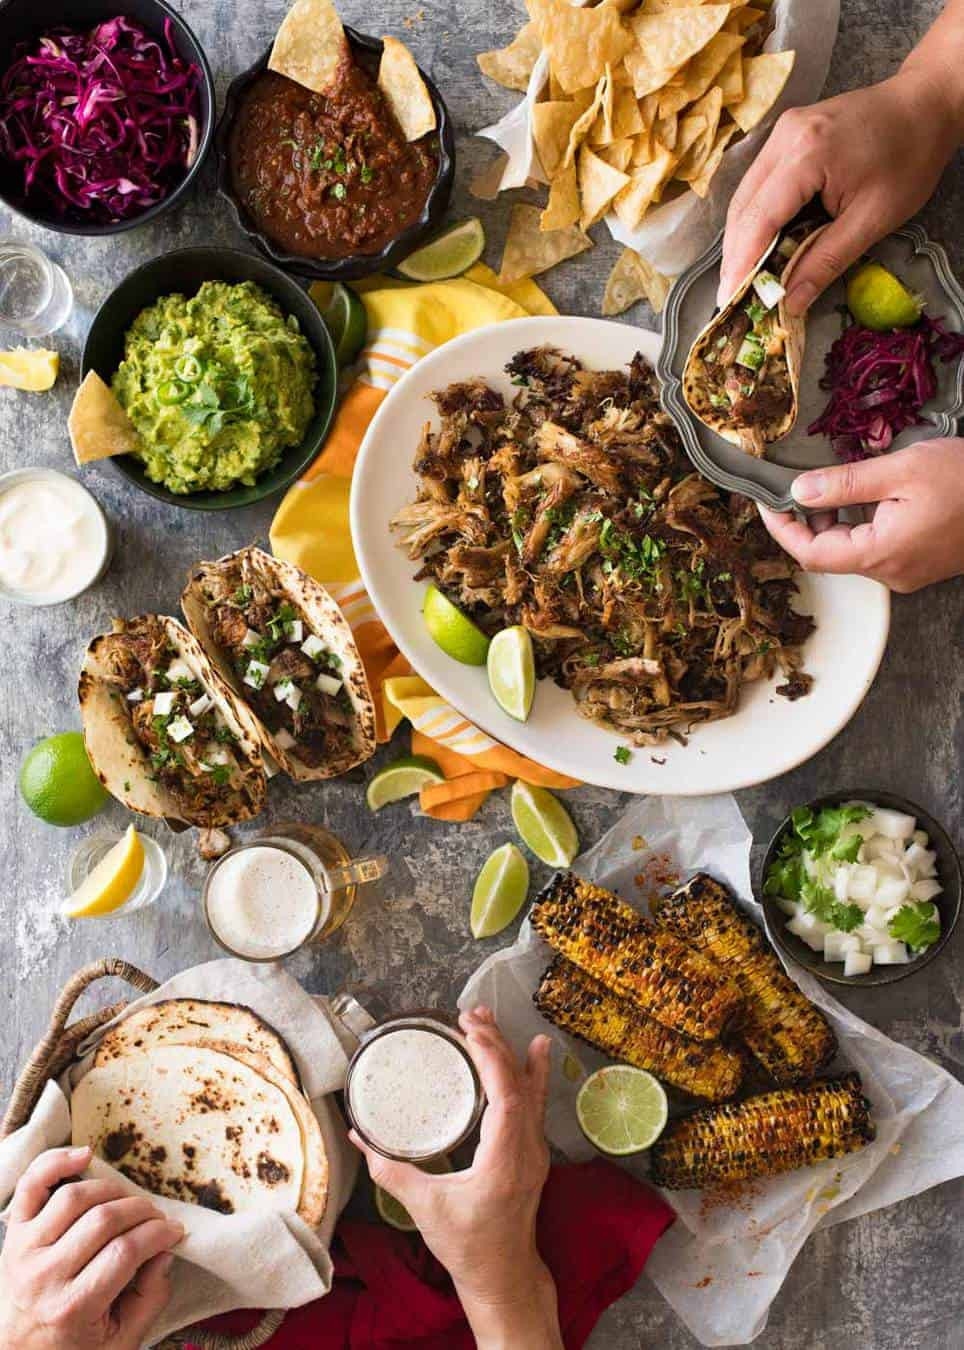 Mexican Food Ideas For Dinner Party
 A Big Mexican Fiesta That s Easy to Make